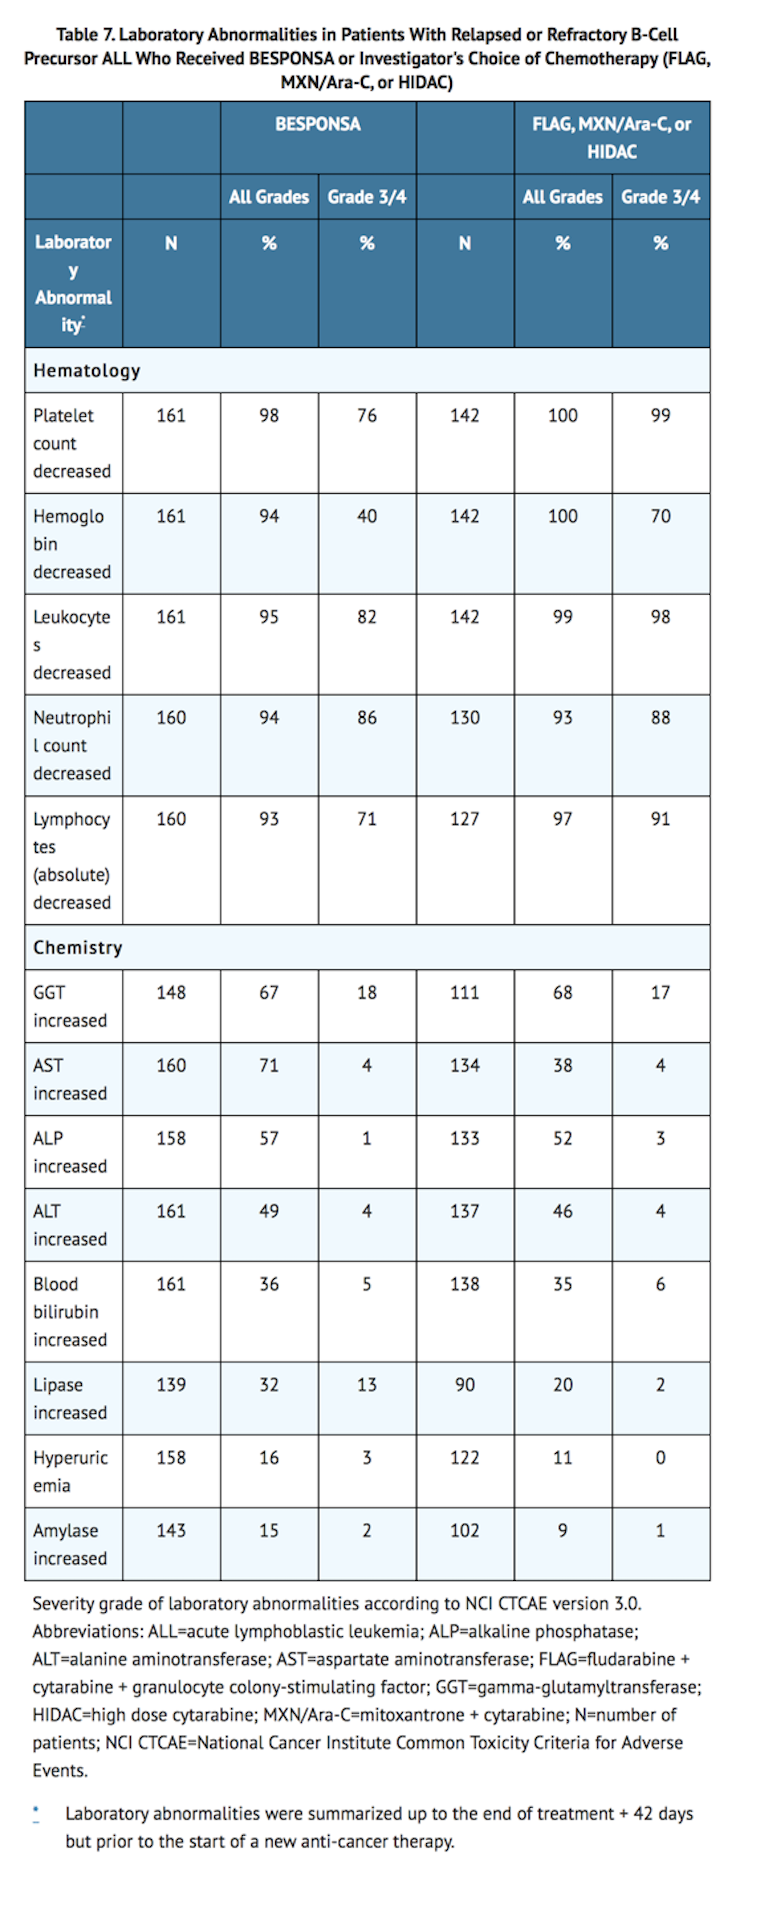 File:Inotuzumab Ozogamicin Adverse Reactions Table 2.png